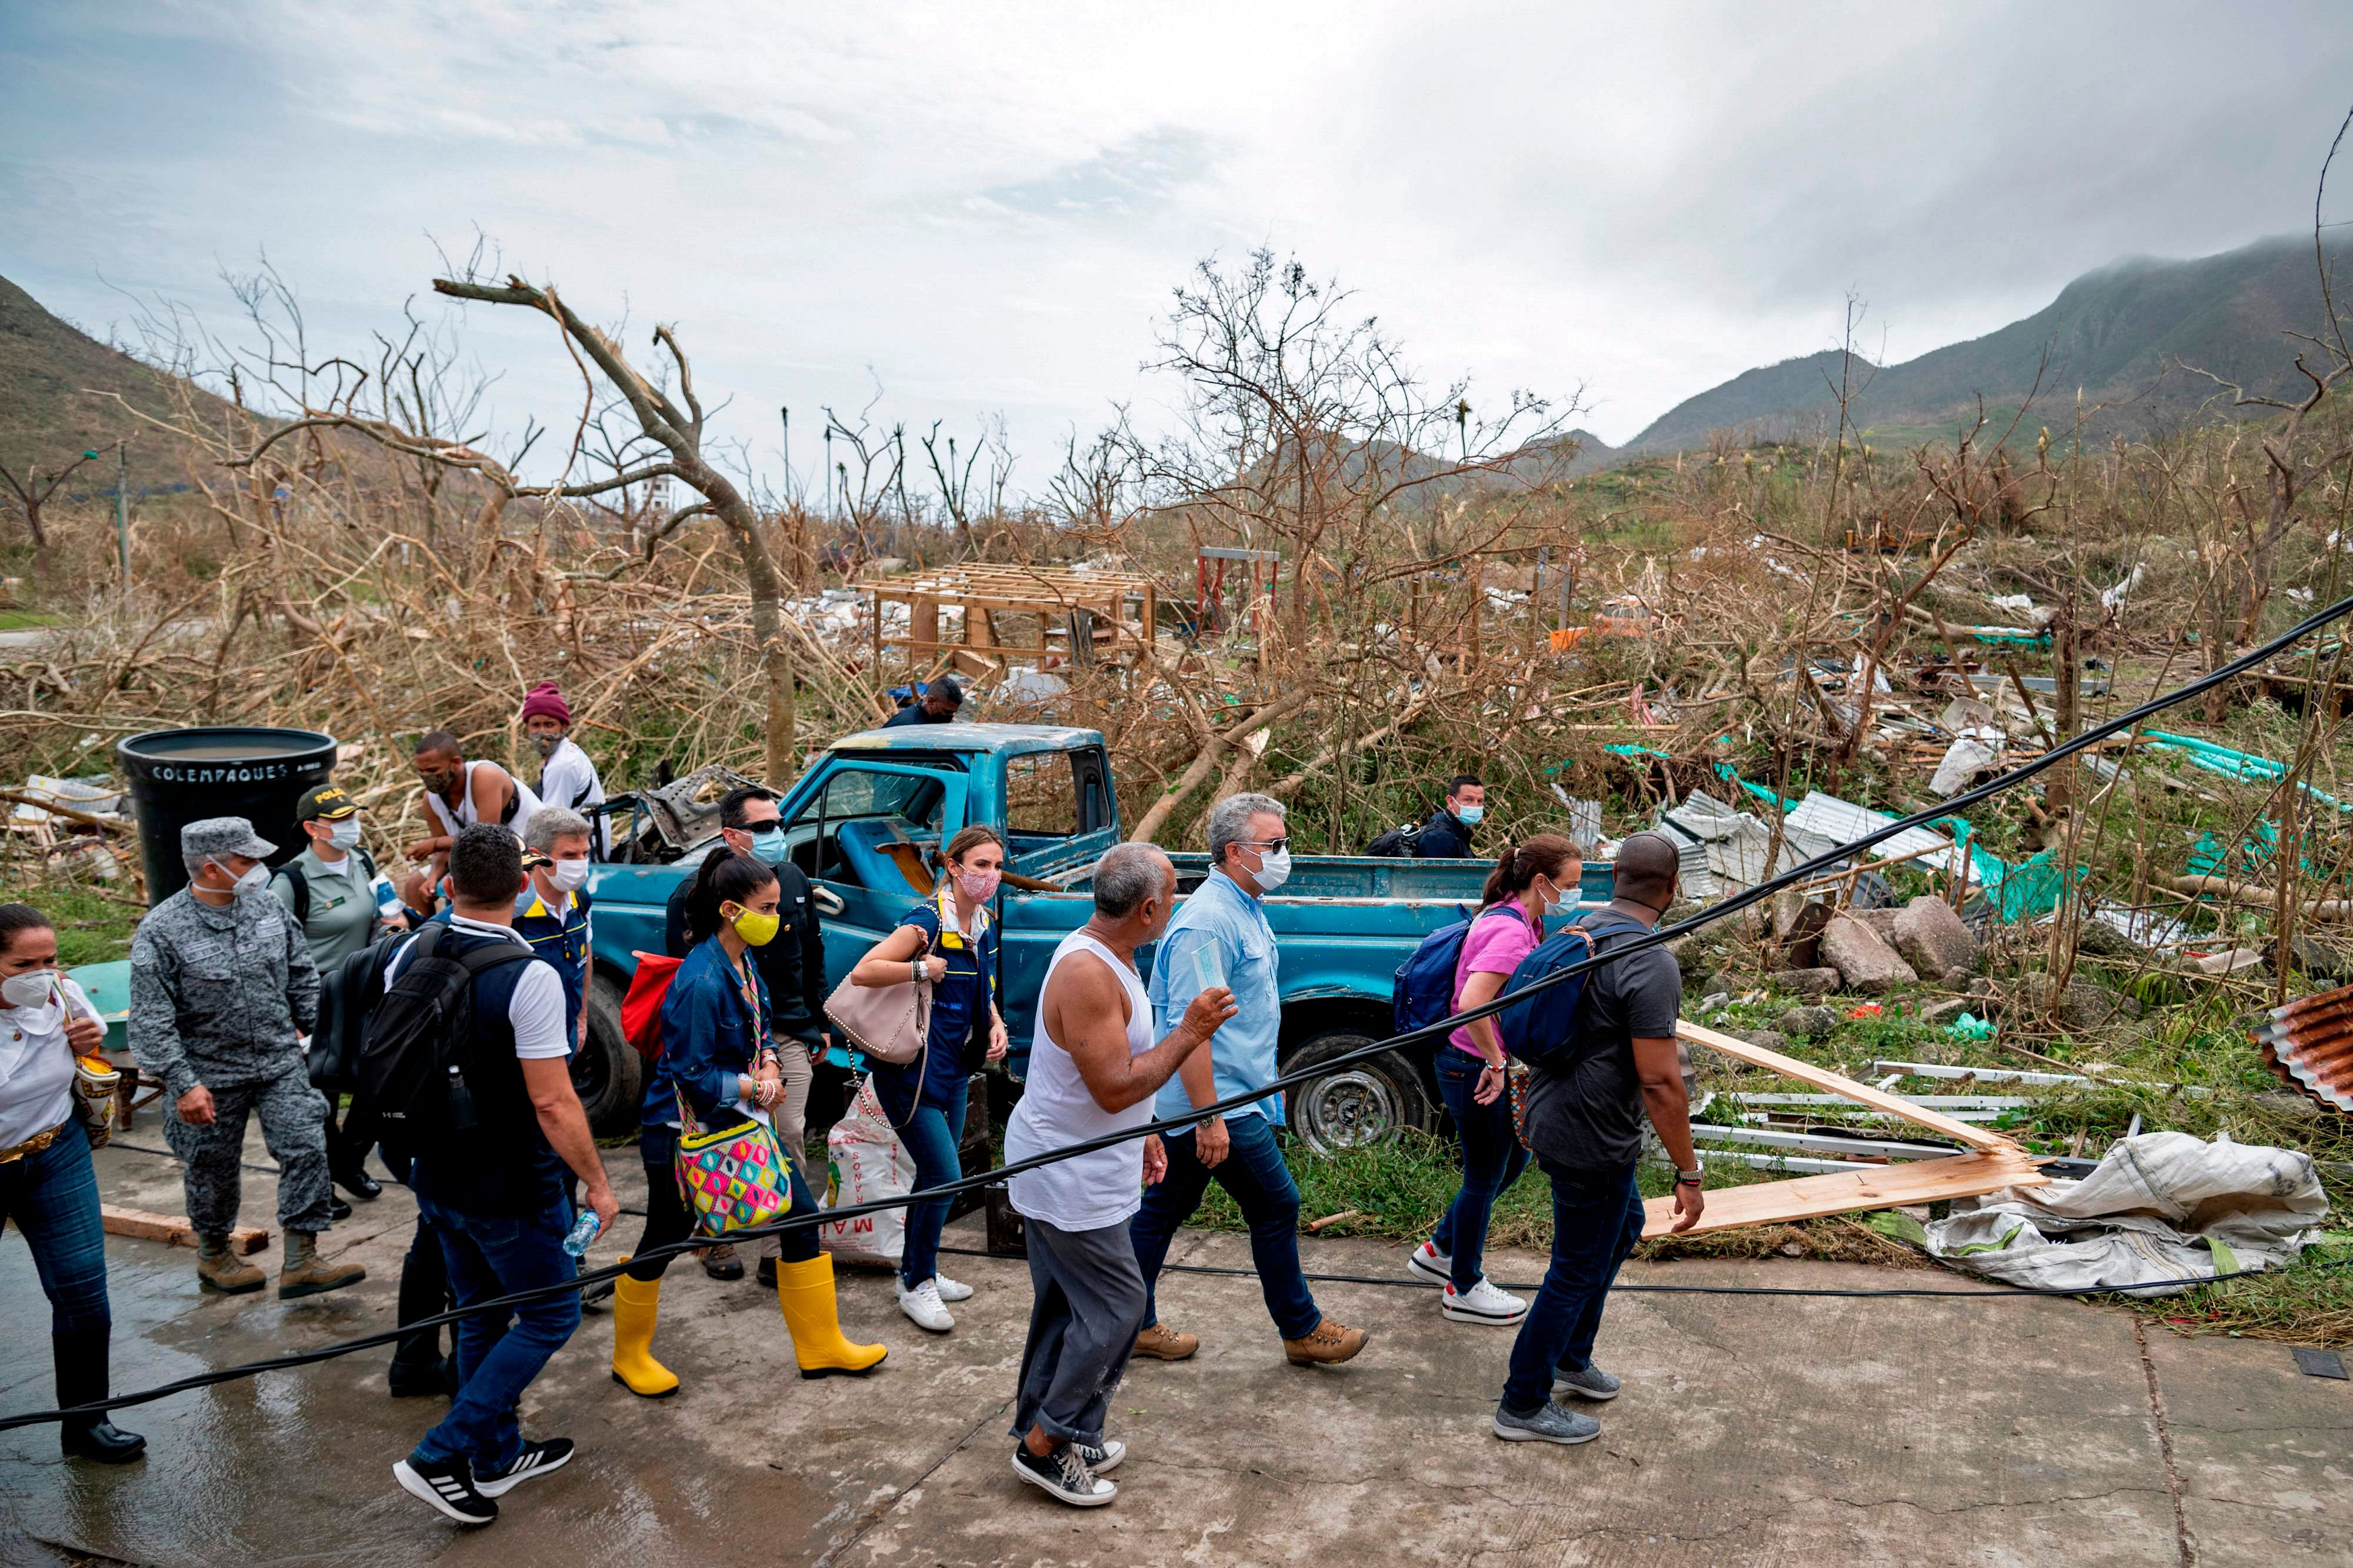   Handout photo released by the Colombian Presidency of Colombian President Ivan Duque (3-R) visiting areas damaged by Hurricane Iota in Providencia, Colombia, on November 17, 2020. - Iota left one person dead after sweeping the Colombian Caribbean island of Providencia, where it caused widespread damage. Credit: Colombian Presidency / AFP